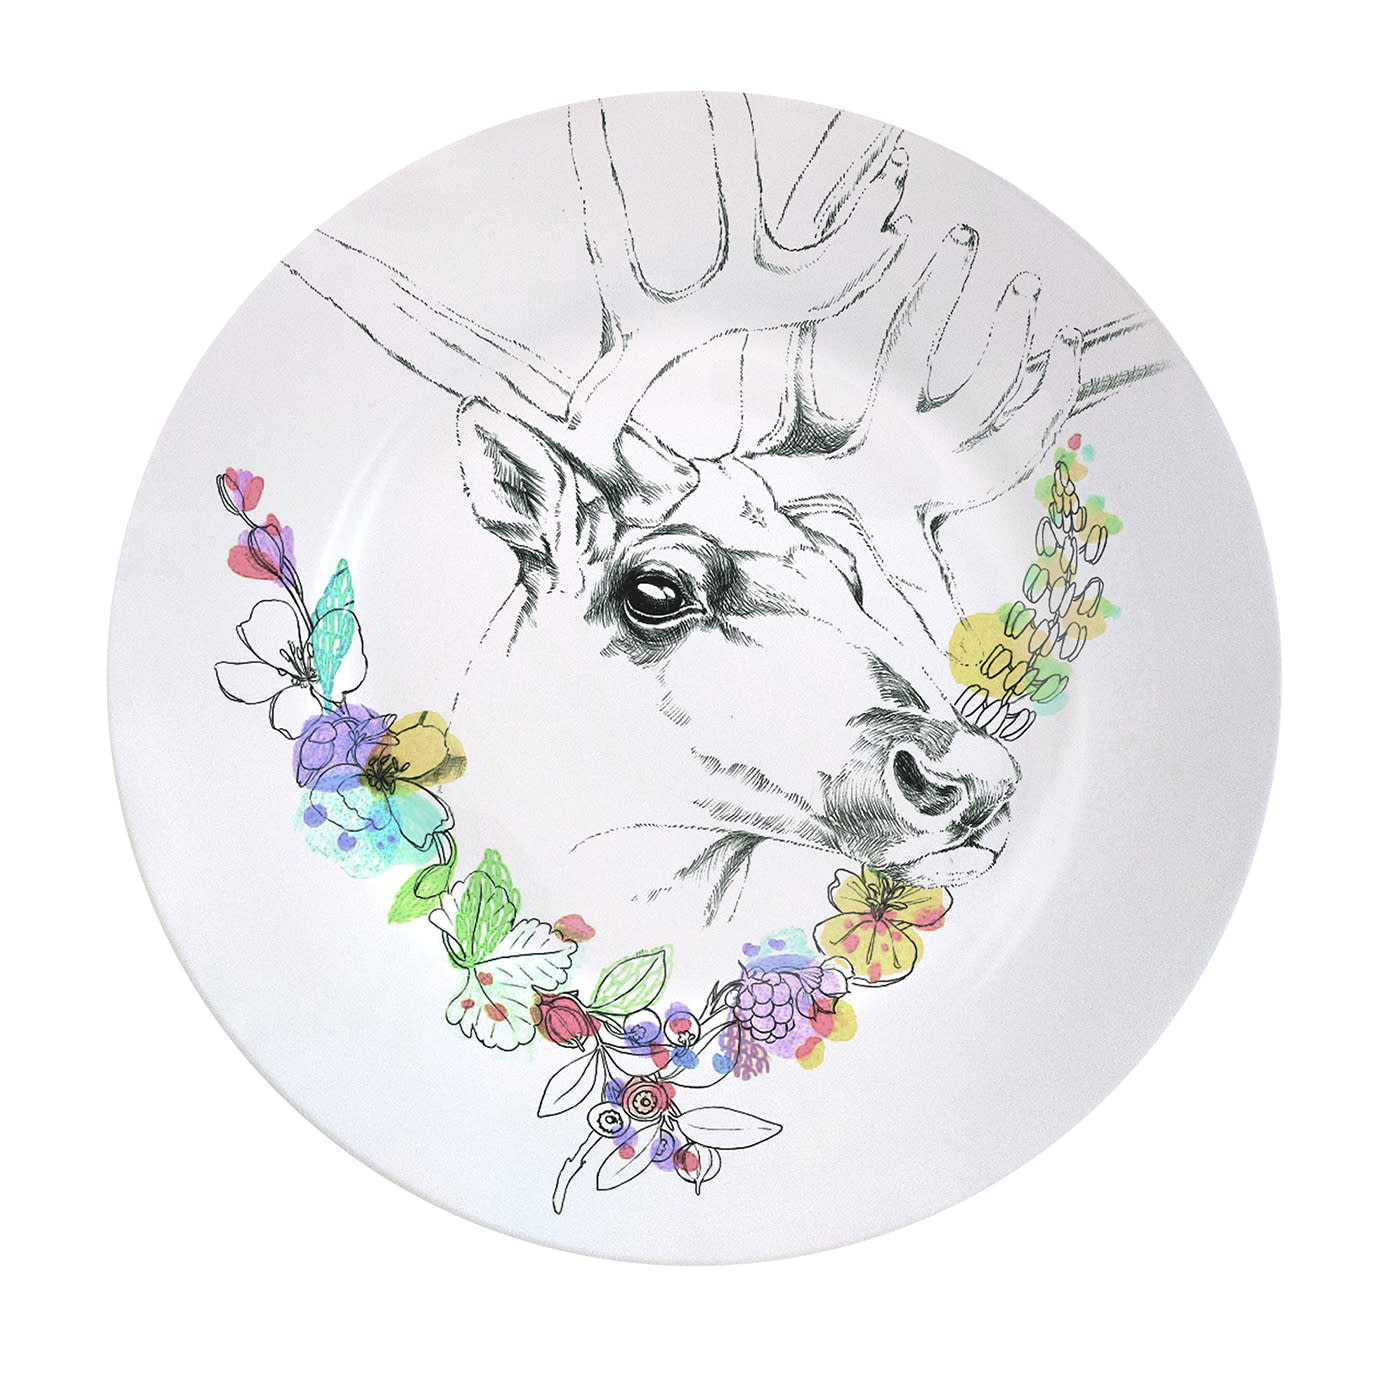 An Ode To The Woods Caribou Dinner Plate - Francesca Colombo